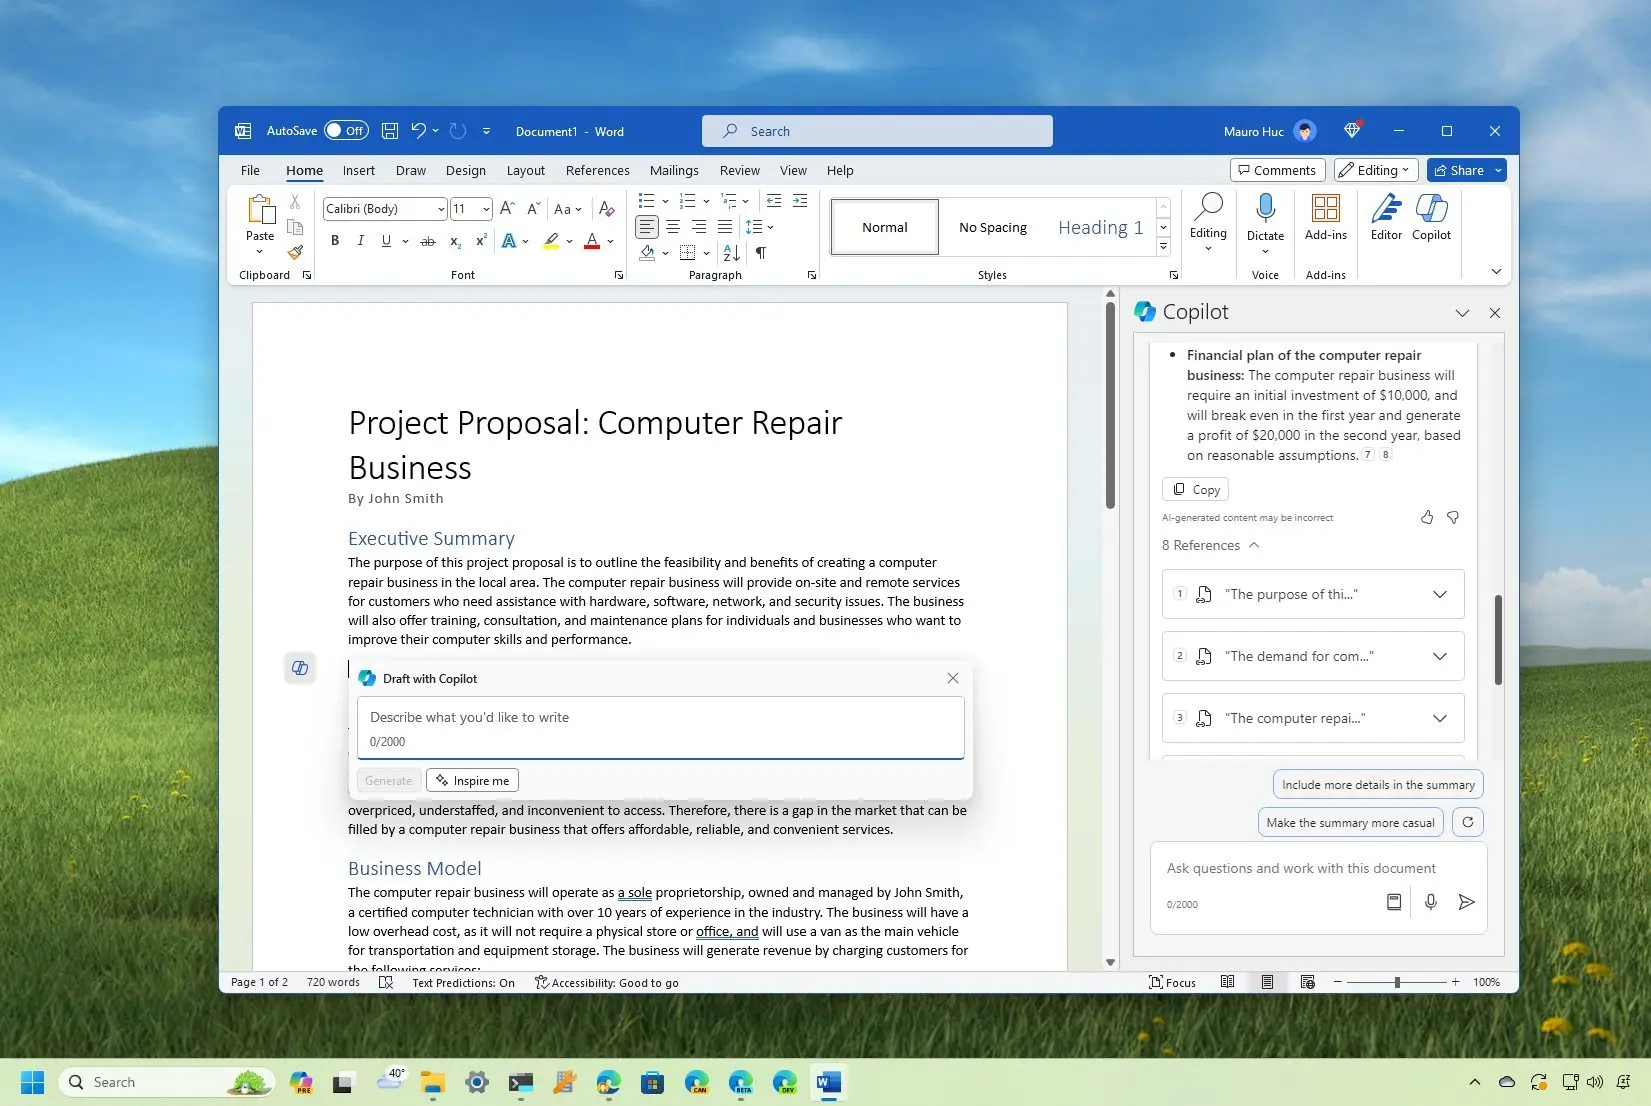 How to use Copilot in Word for Microsoft 365 on Windows 11